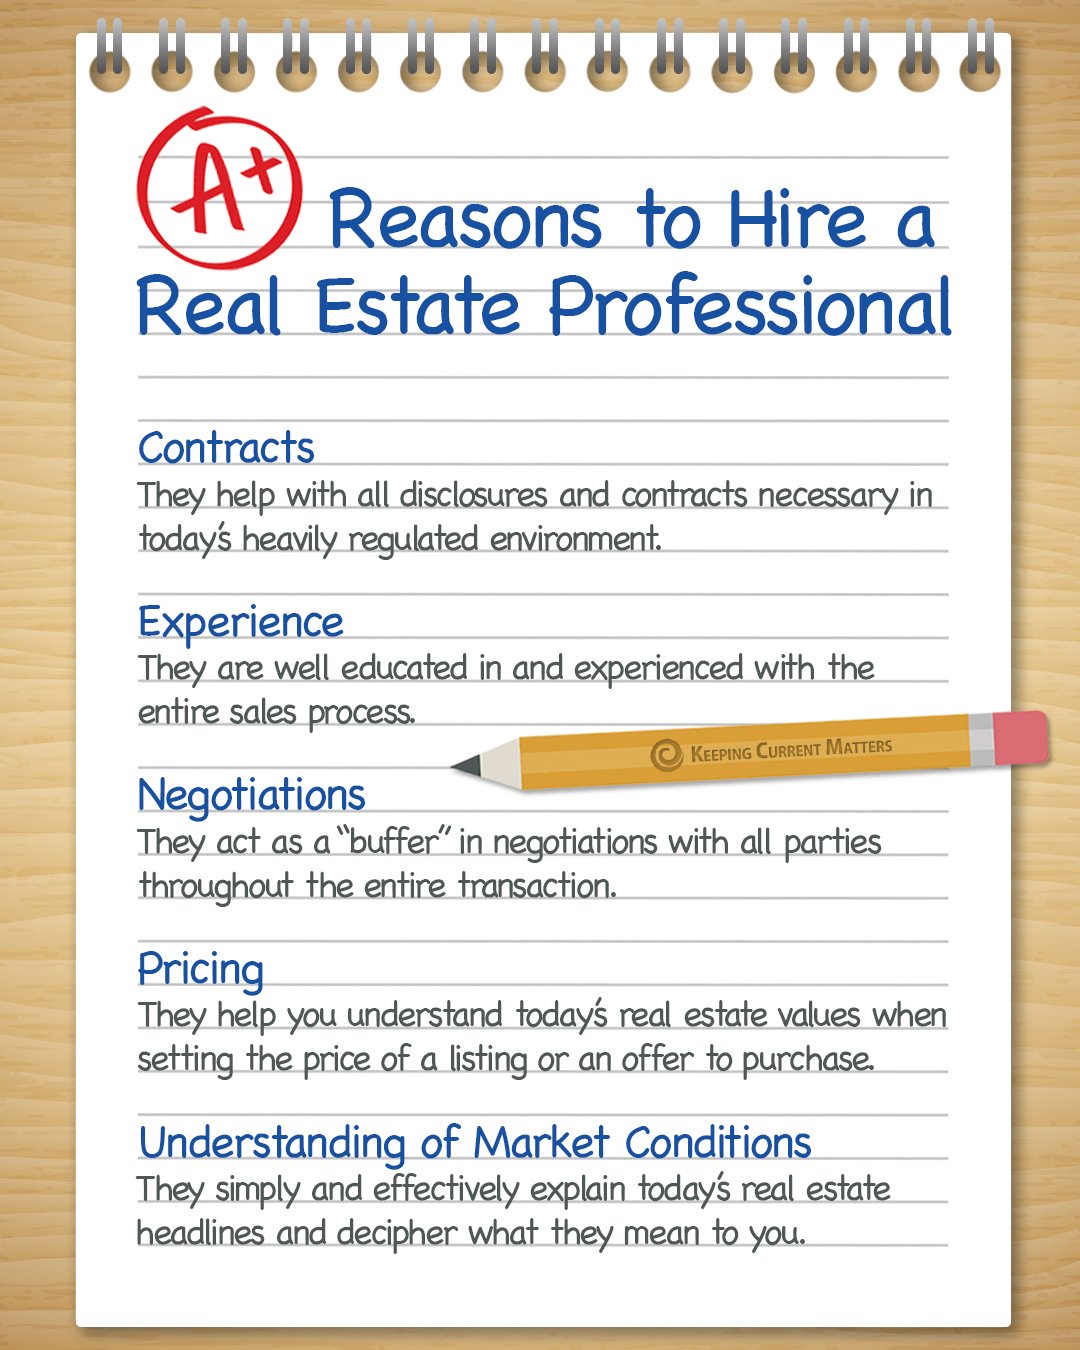 A+ Reasons to Hire a Real Estate Pro [INFOGRAPHIC] | Keeping Current Matters